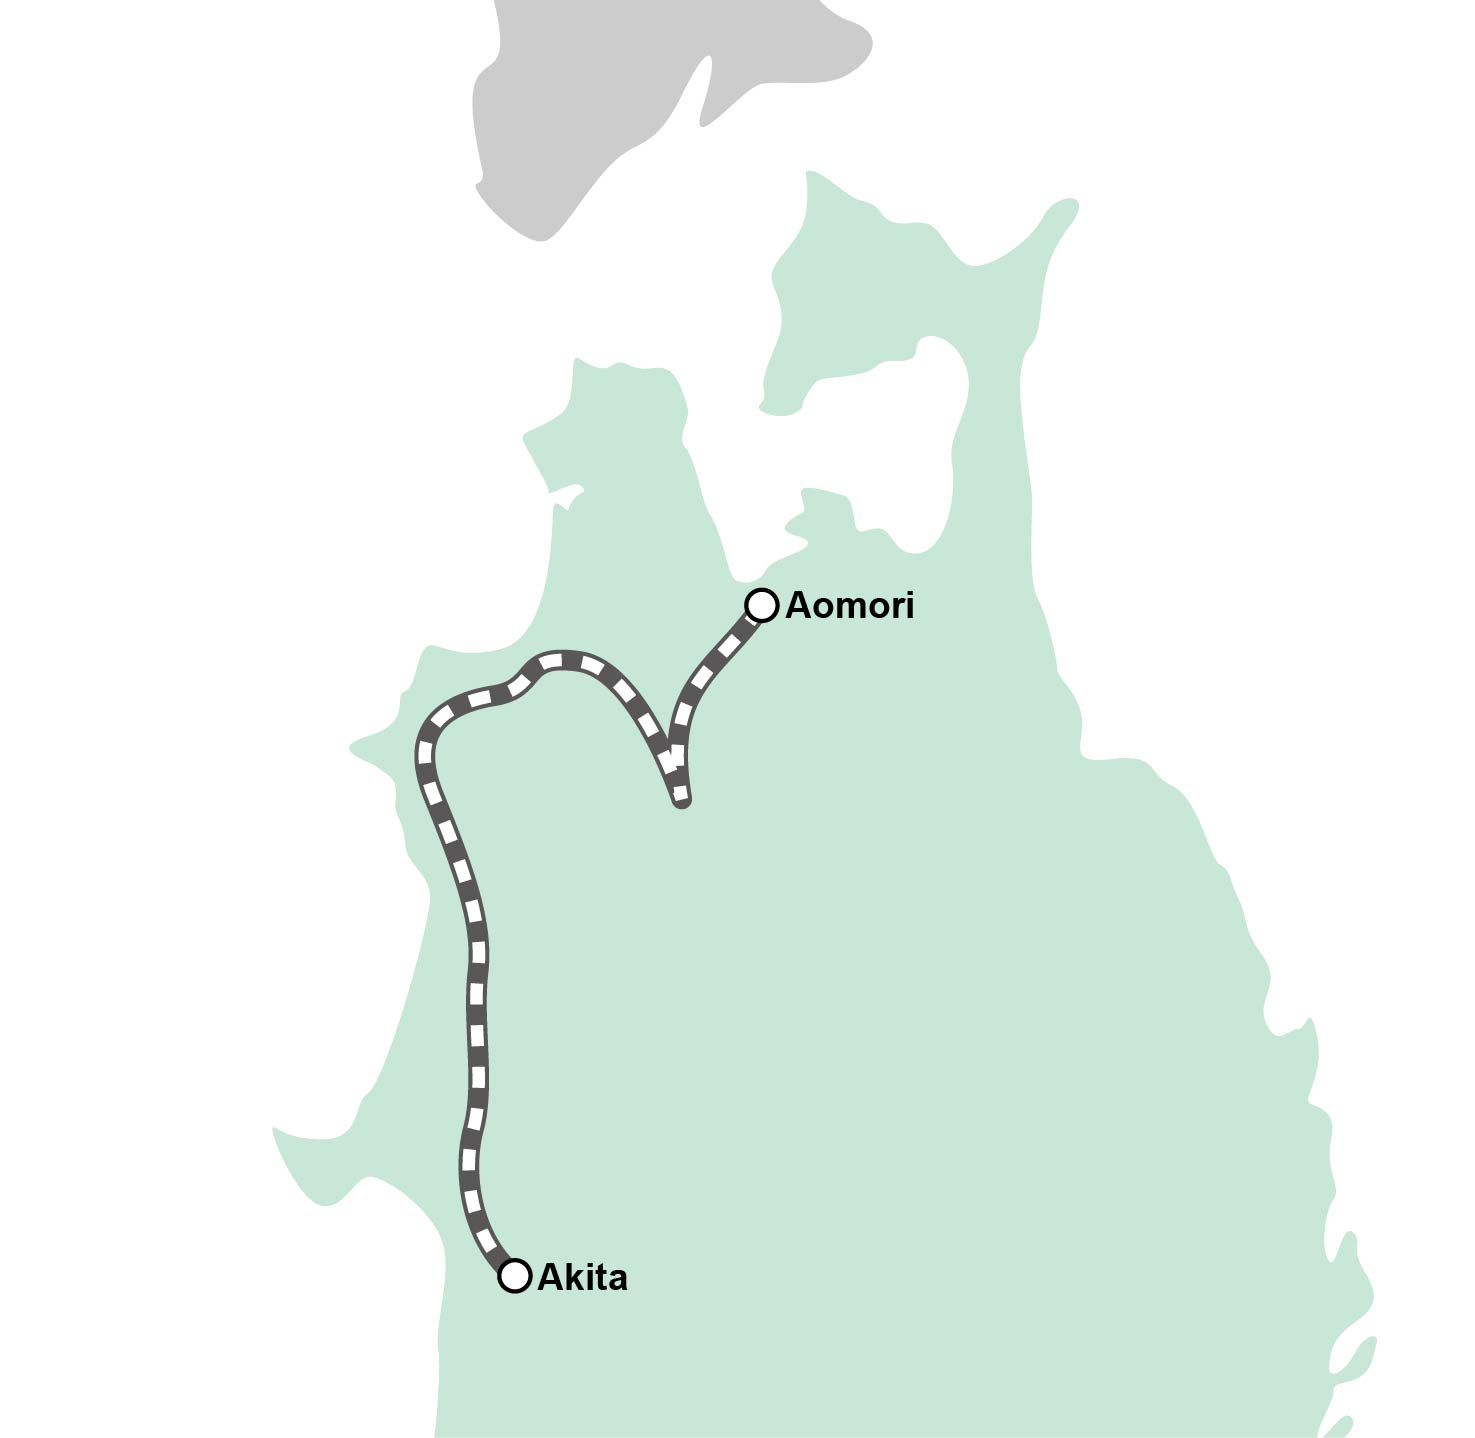 Main route